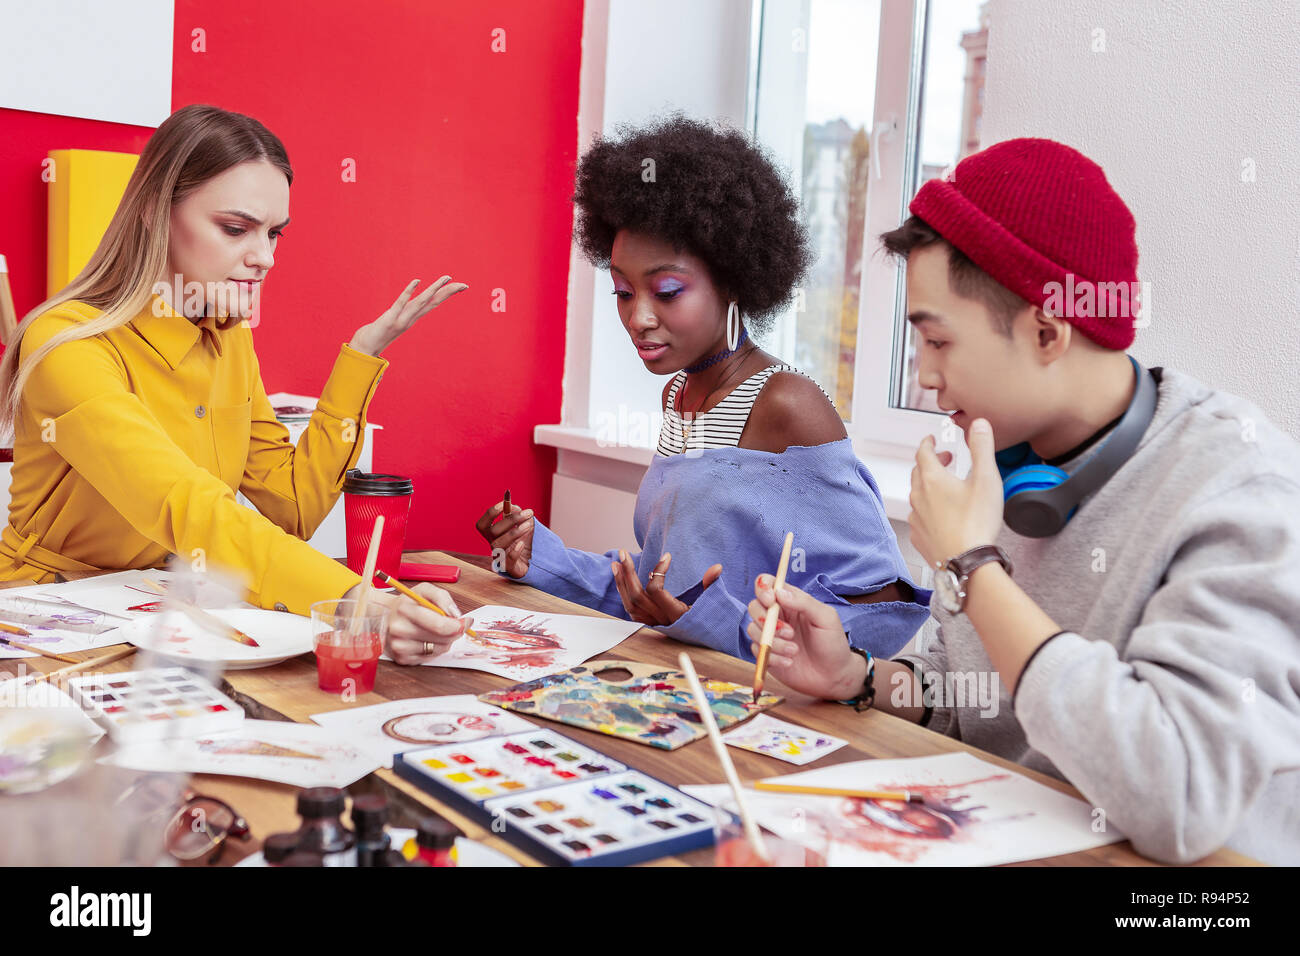 Three art students having some arguments while working together Stock Photo